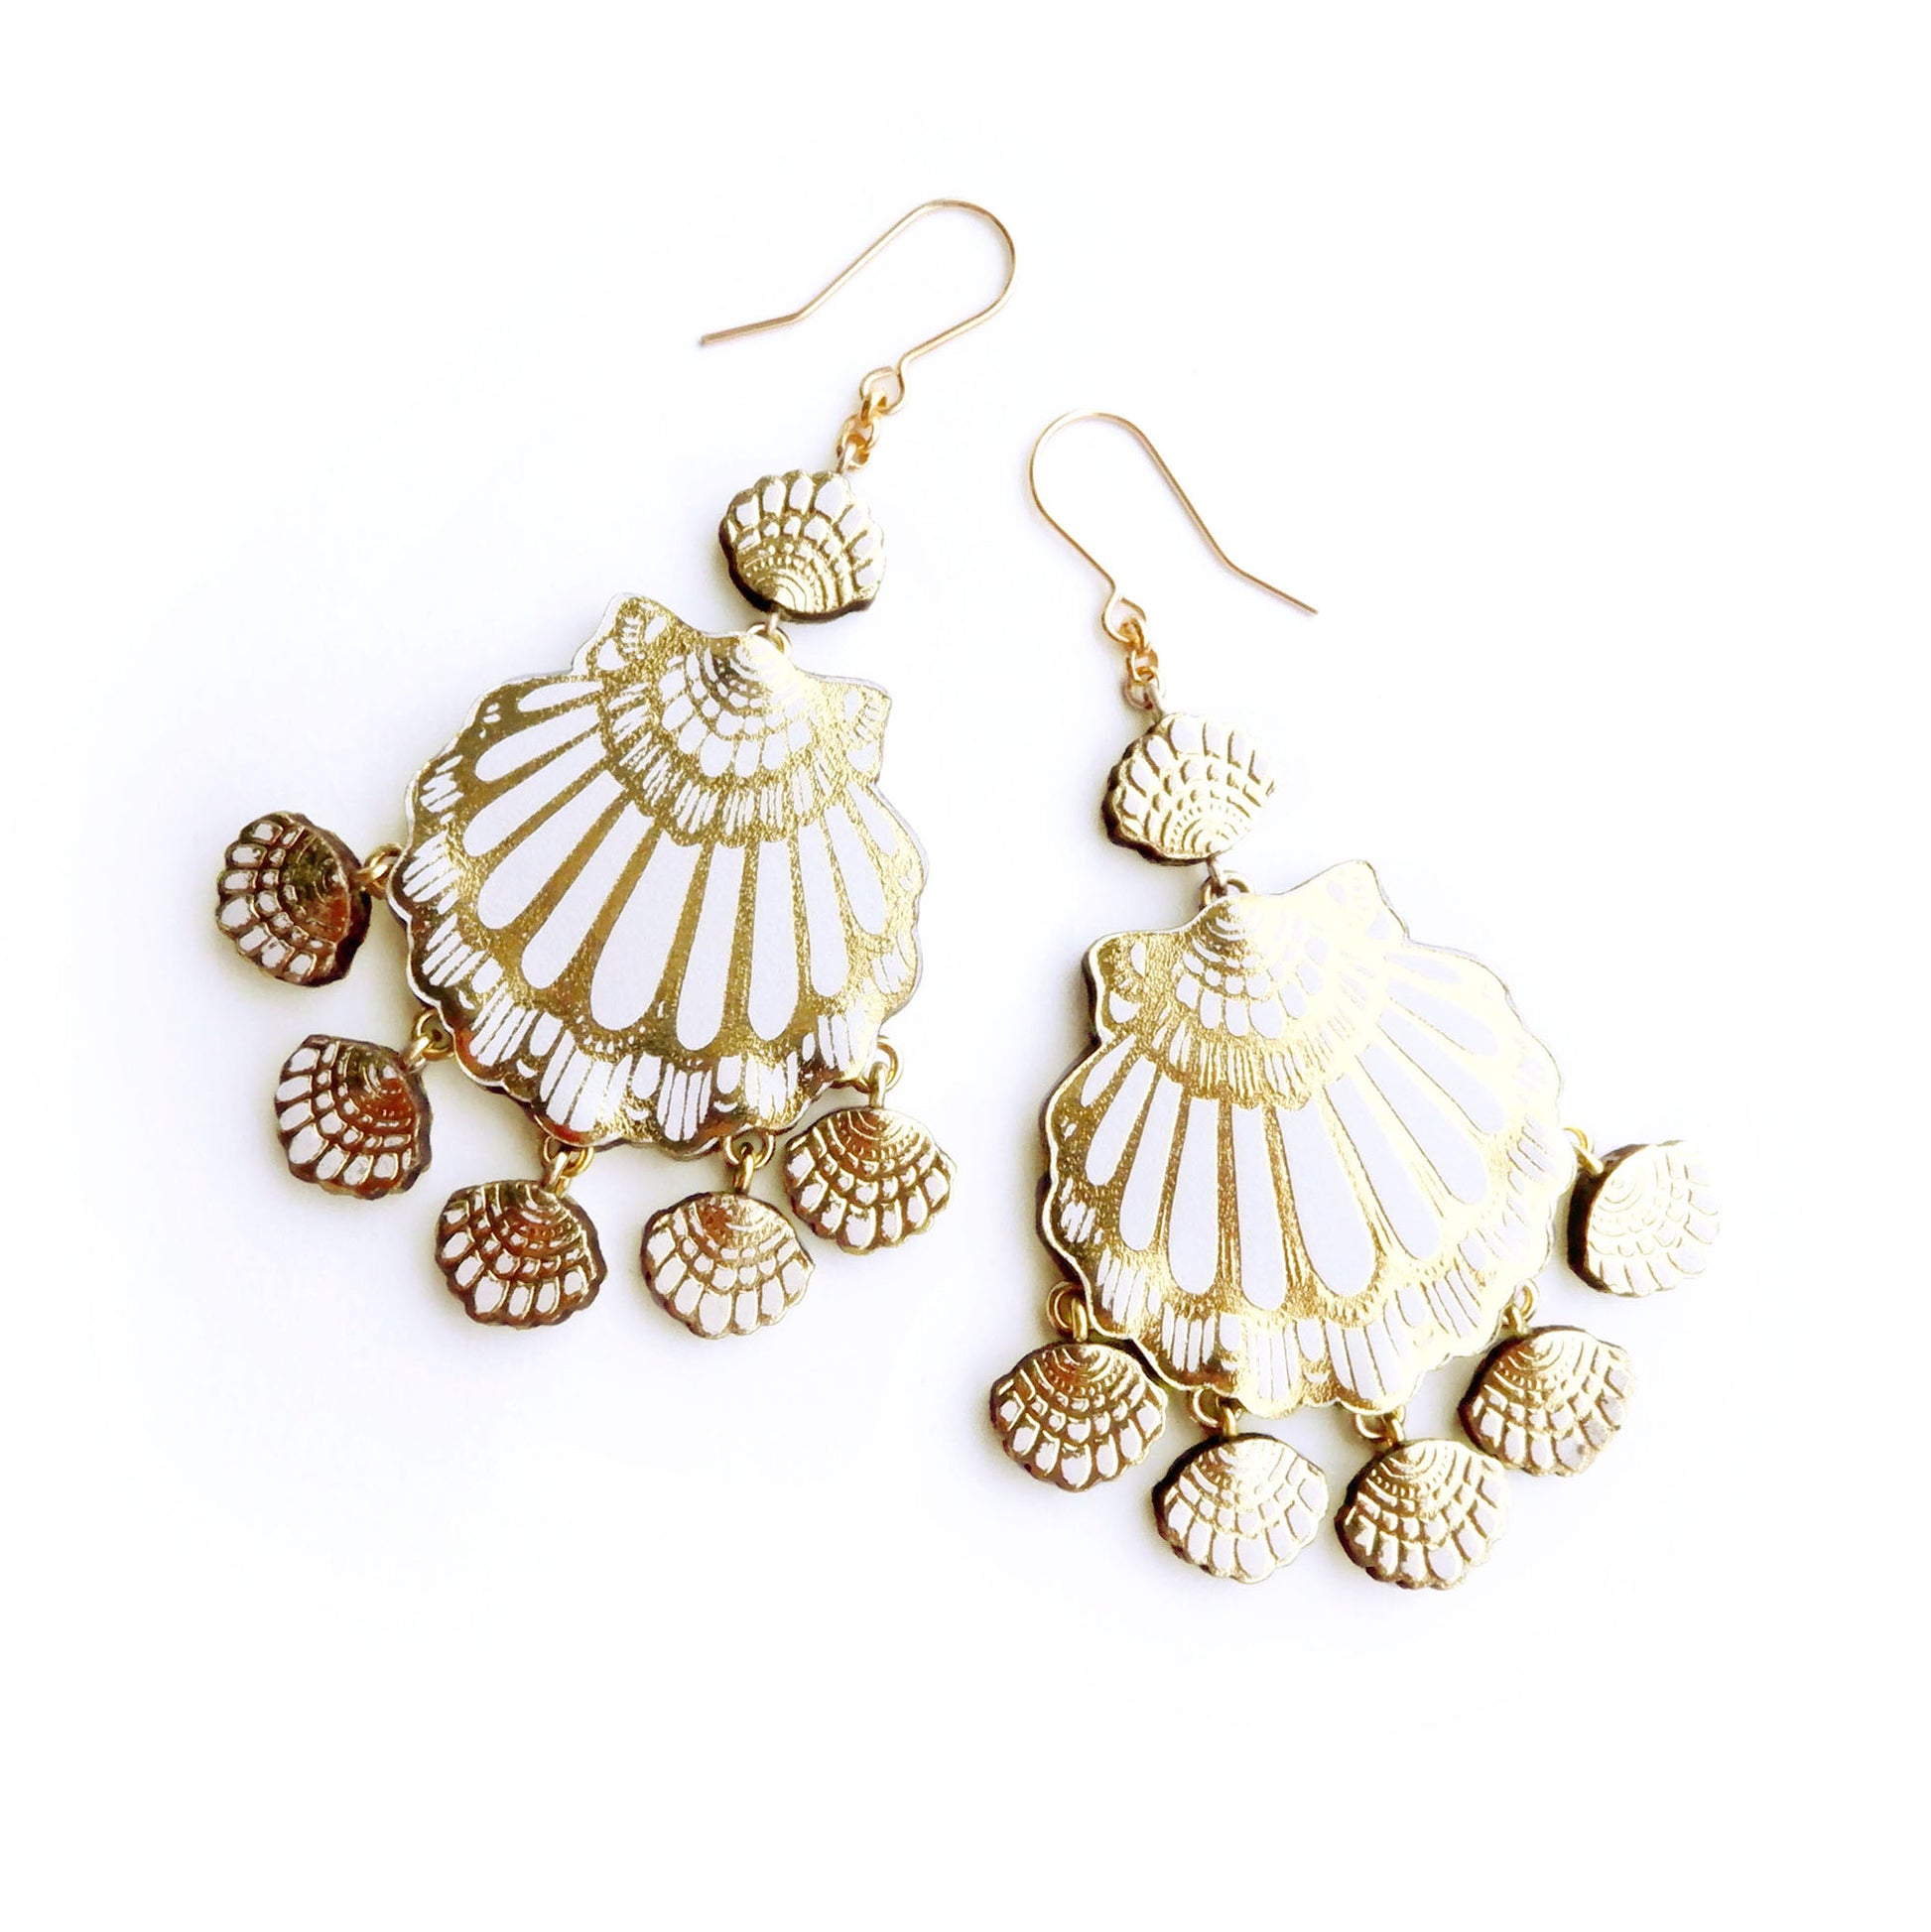 seashell chandelier earrings in white leather with gold printed detail.